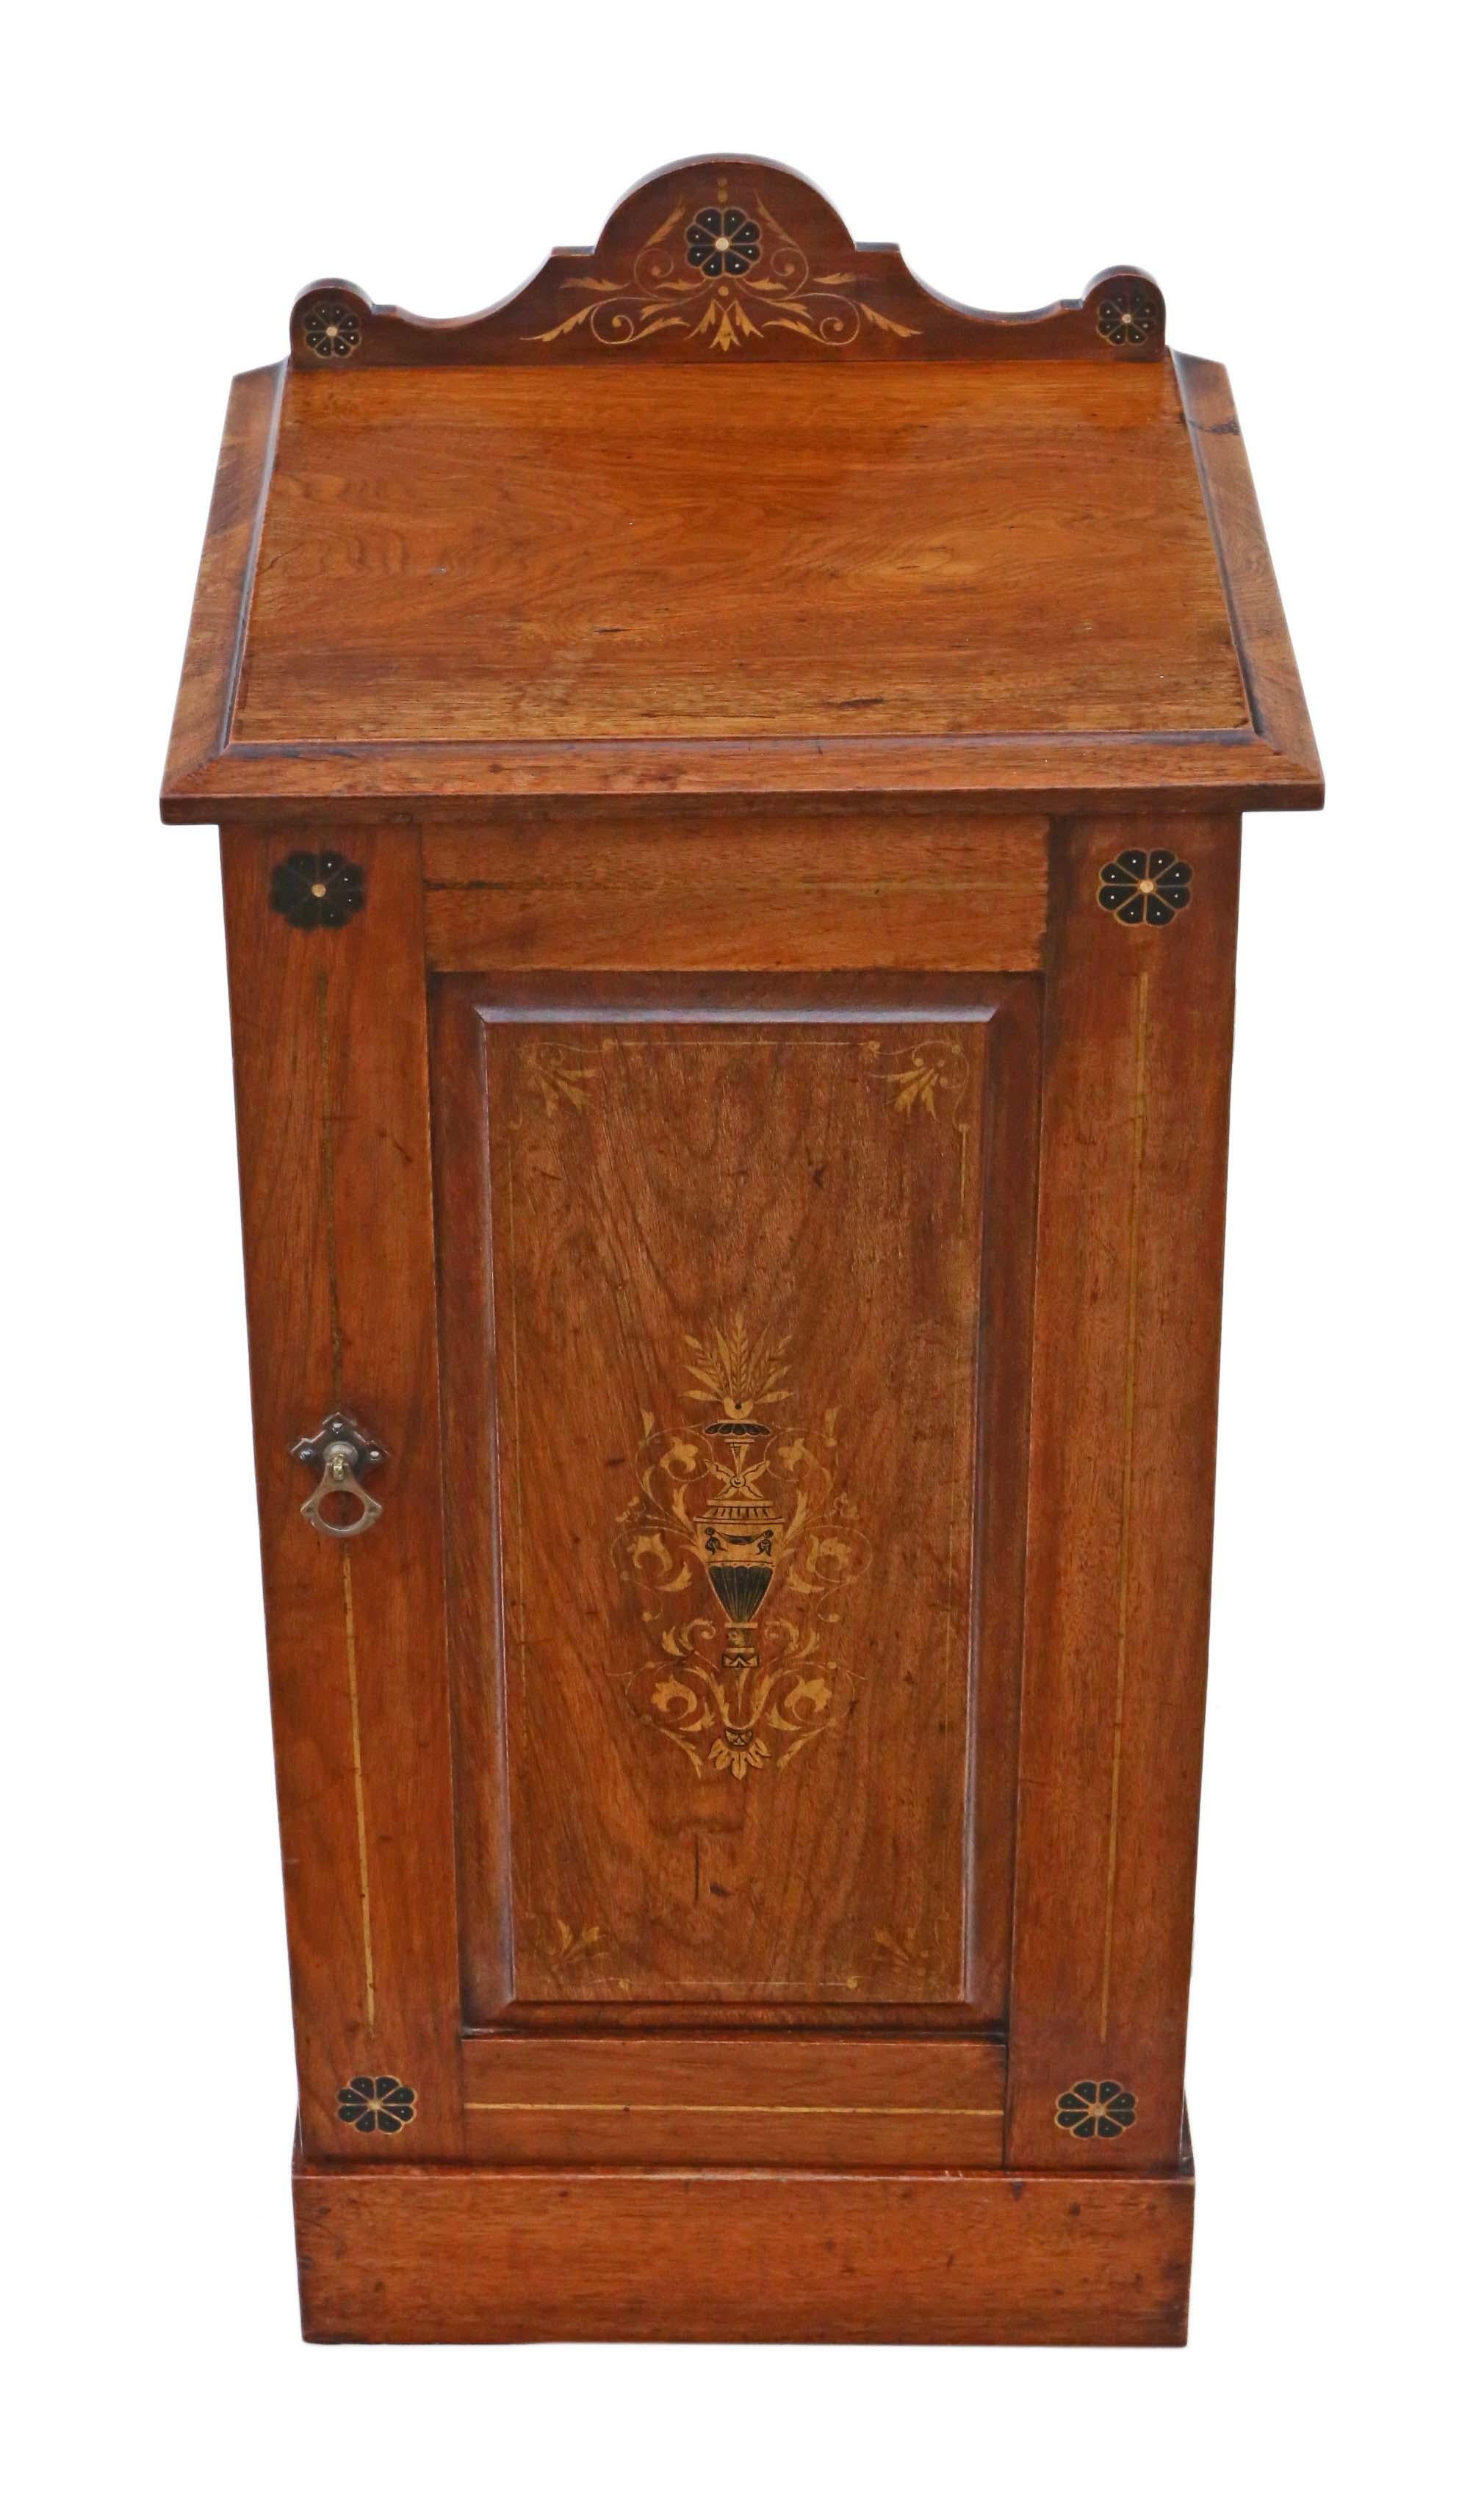 Antique fine quality Victorian C 1895 decorated ash bedside table or cupboard.

Great rare item, which is solid and heavy with no loose joints or woodworm. Lovely decoration and Aesthetic Victorian styling.

Good age, colour and